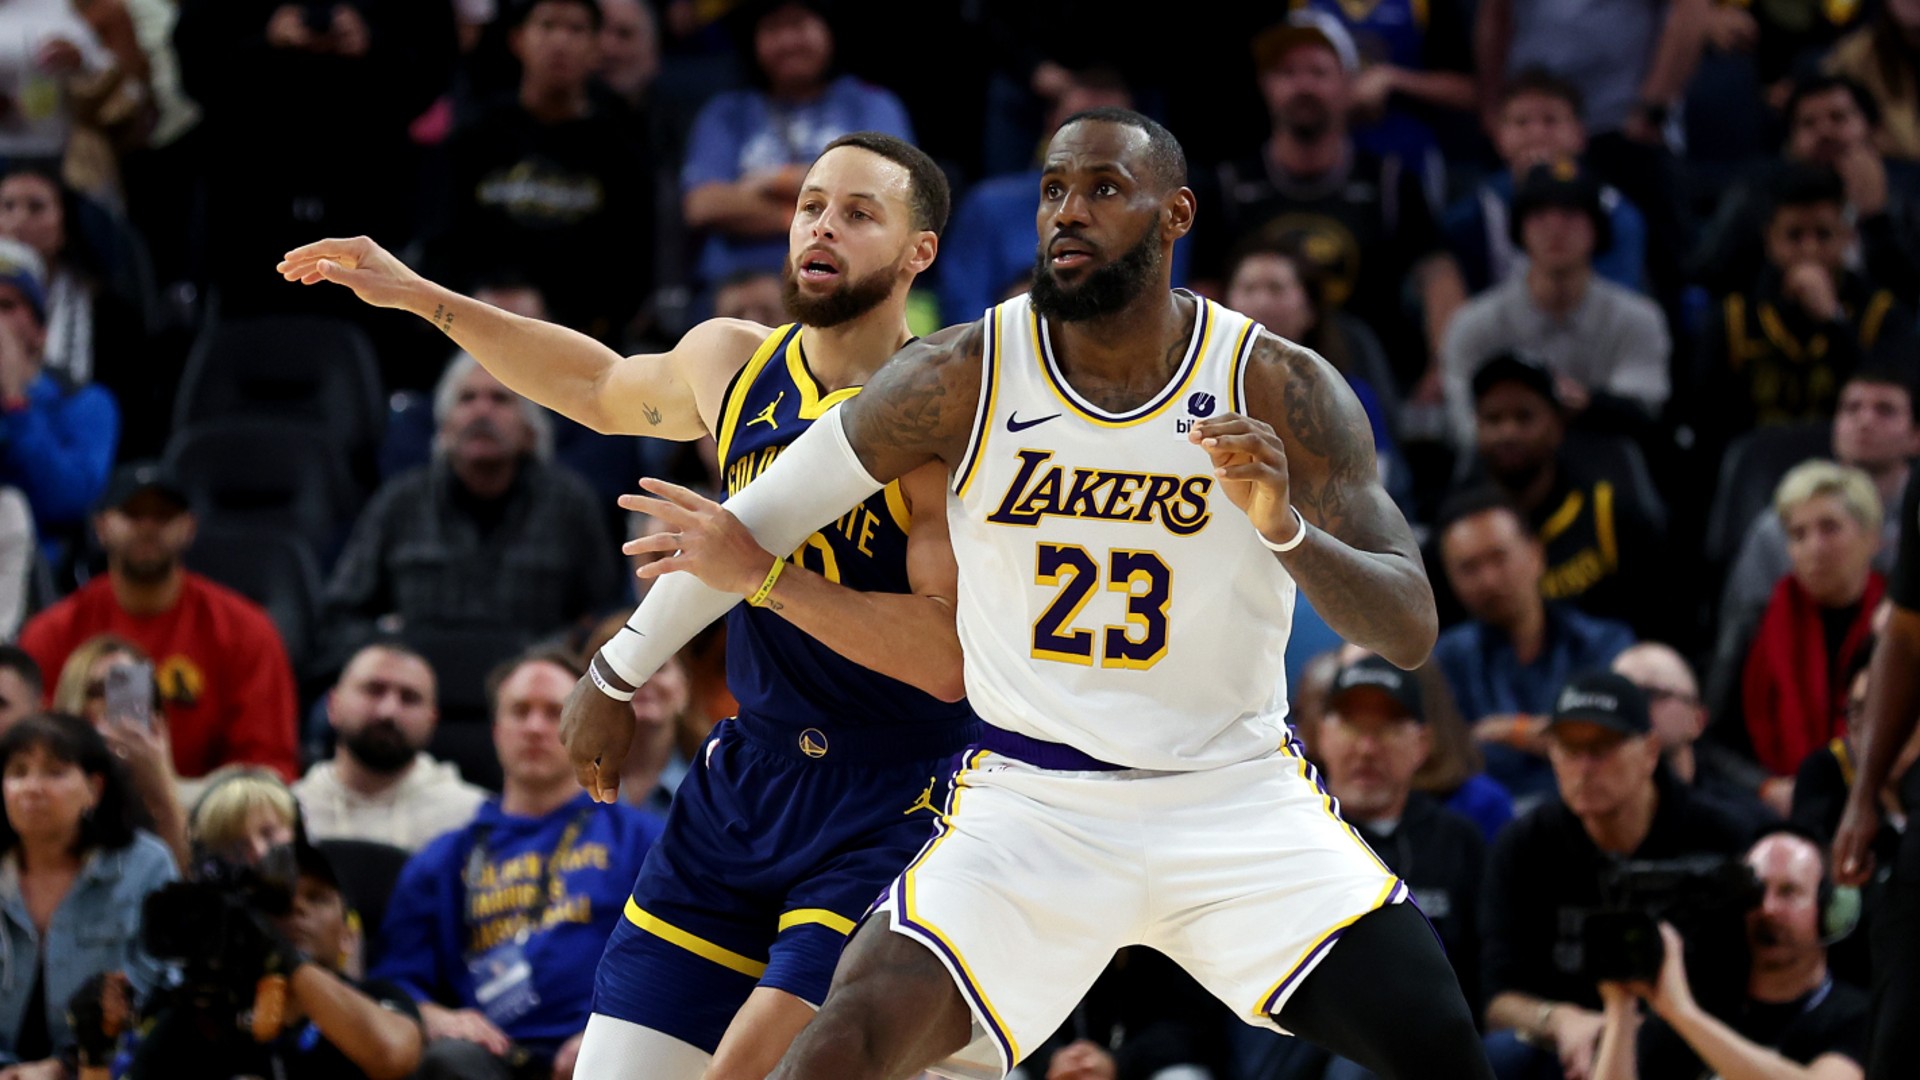 LeBron revels in Curry rivalry